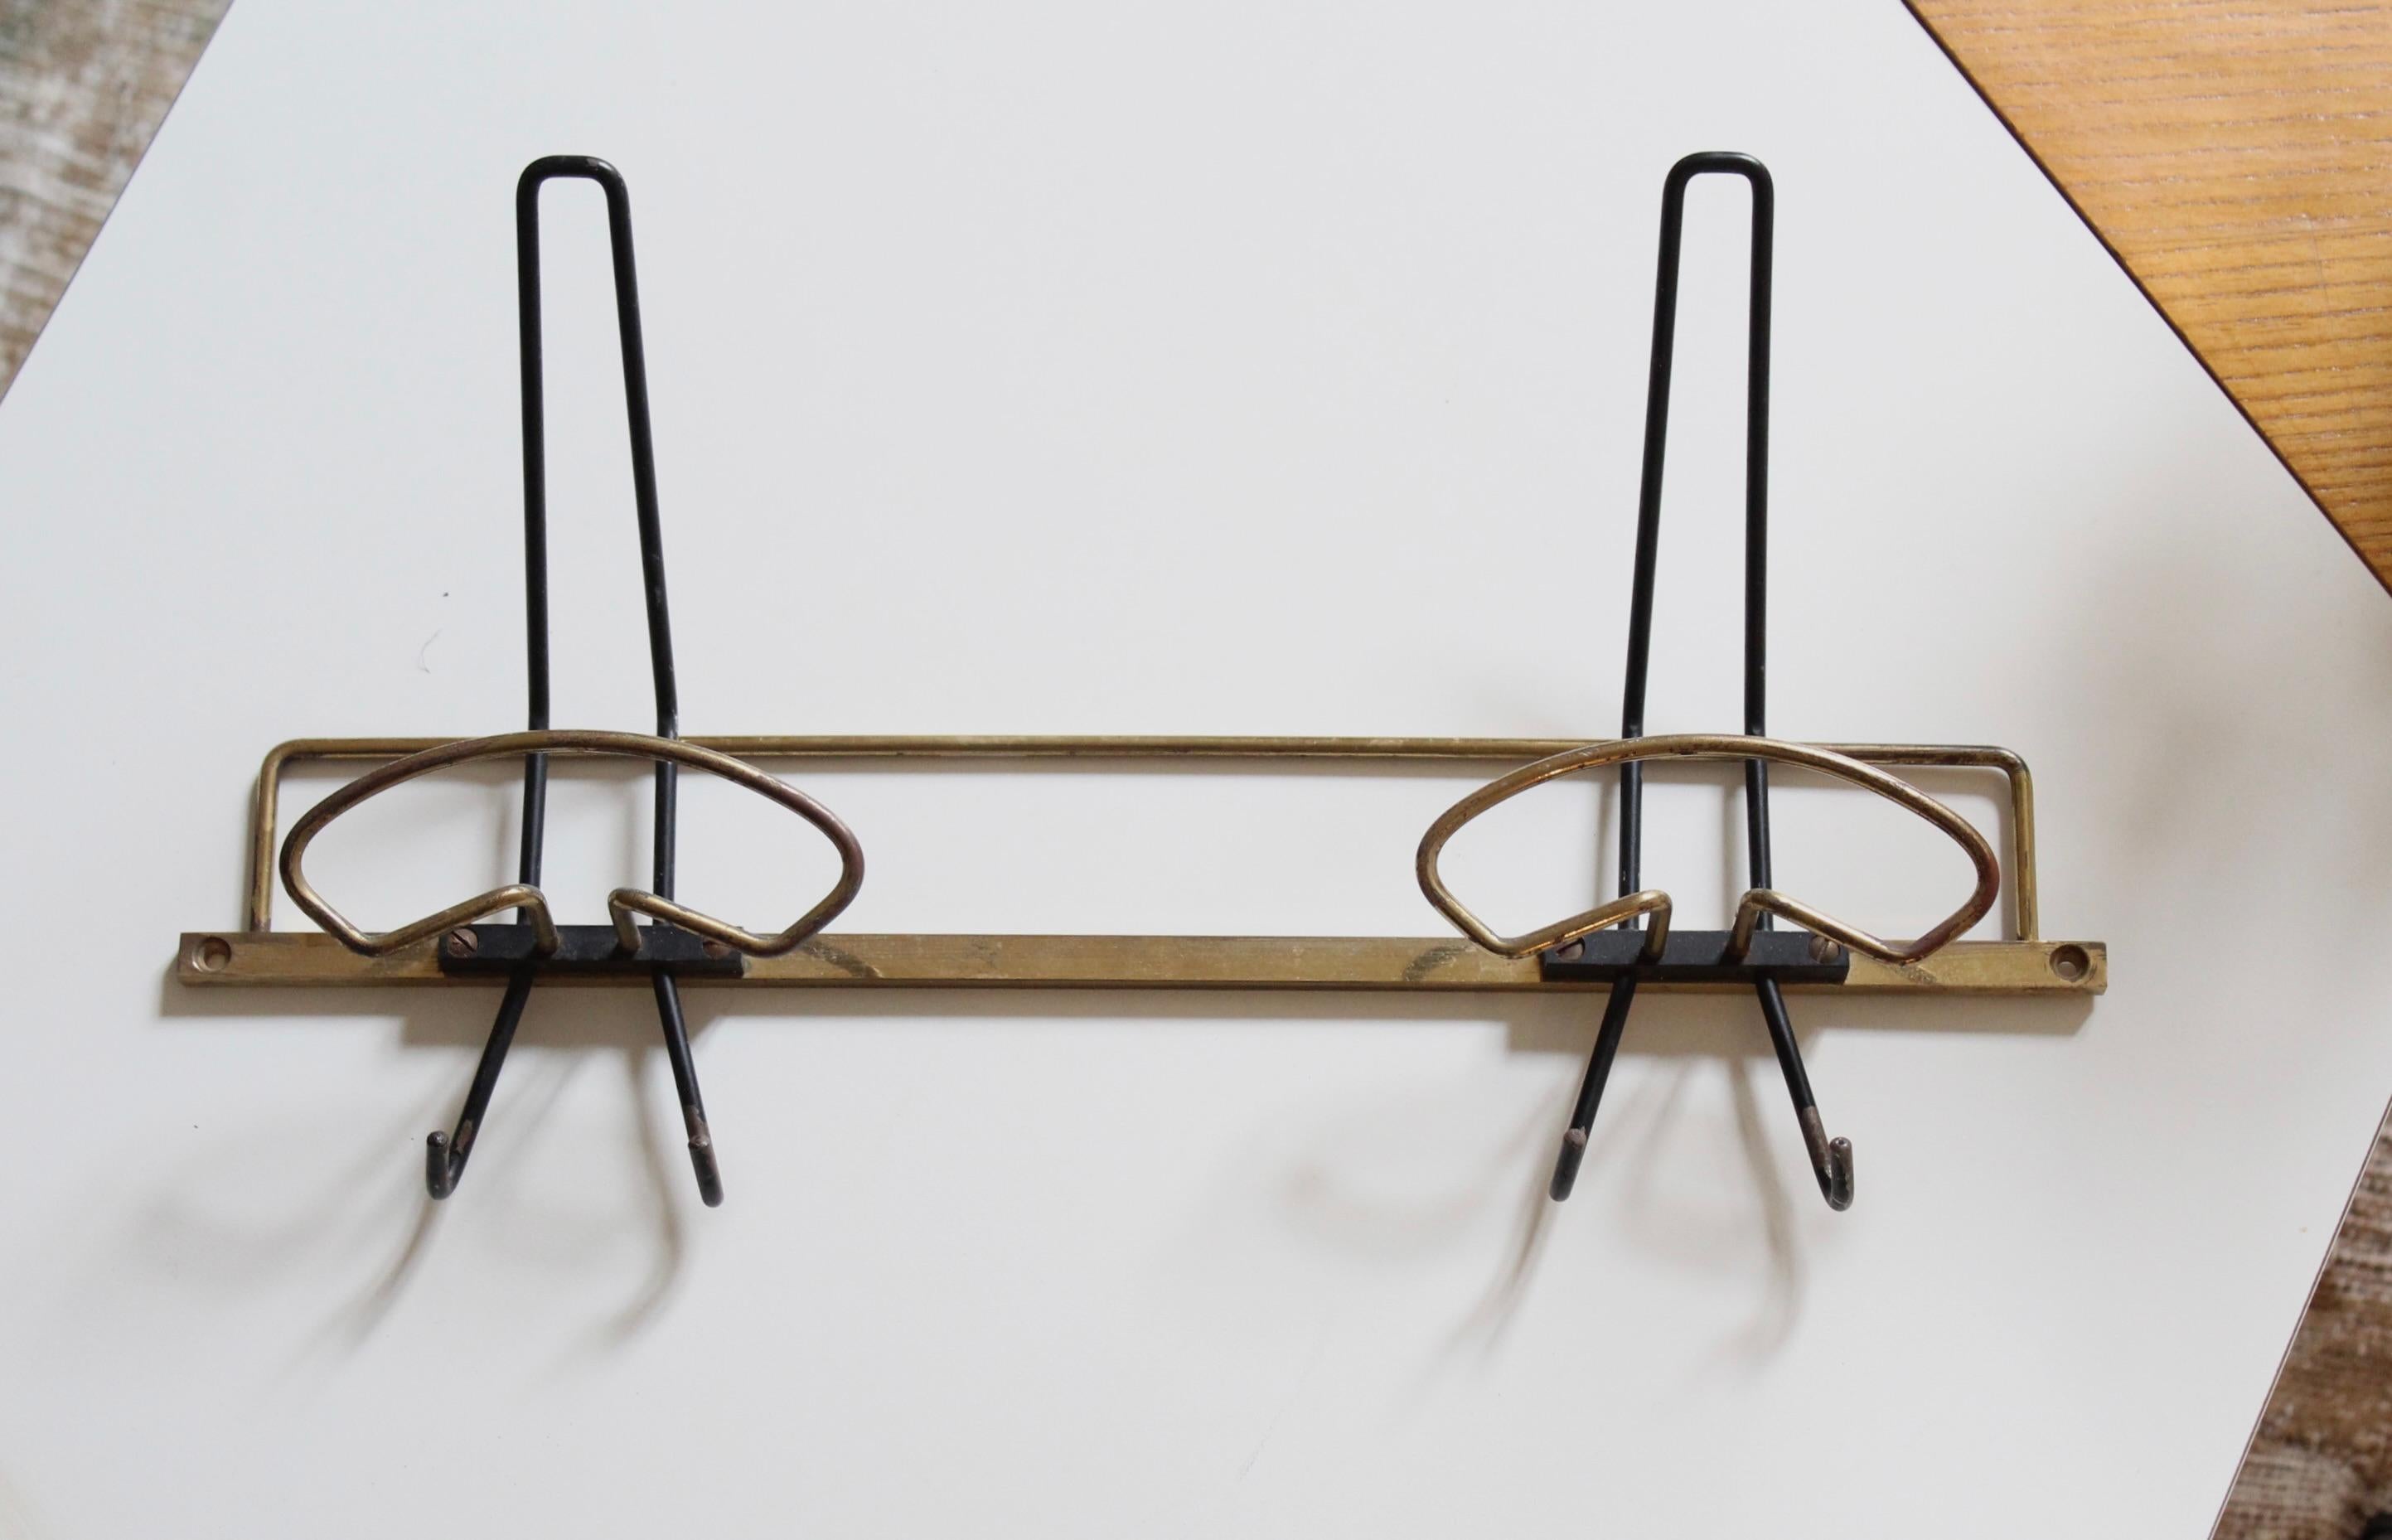 A brass coat hanger designed and produced by an Italian designer, Italy, 1950s.

